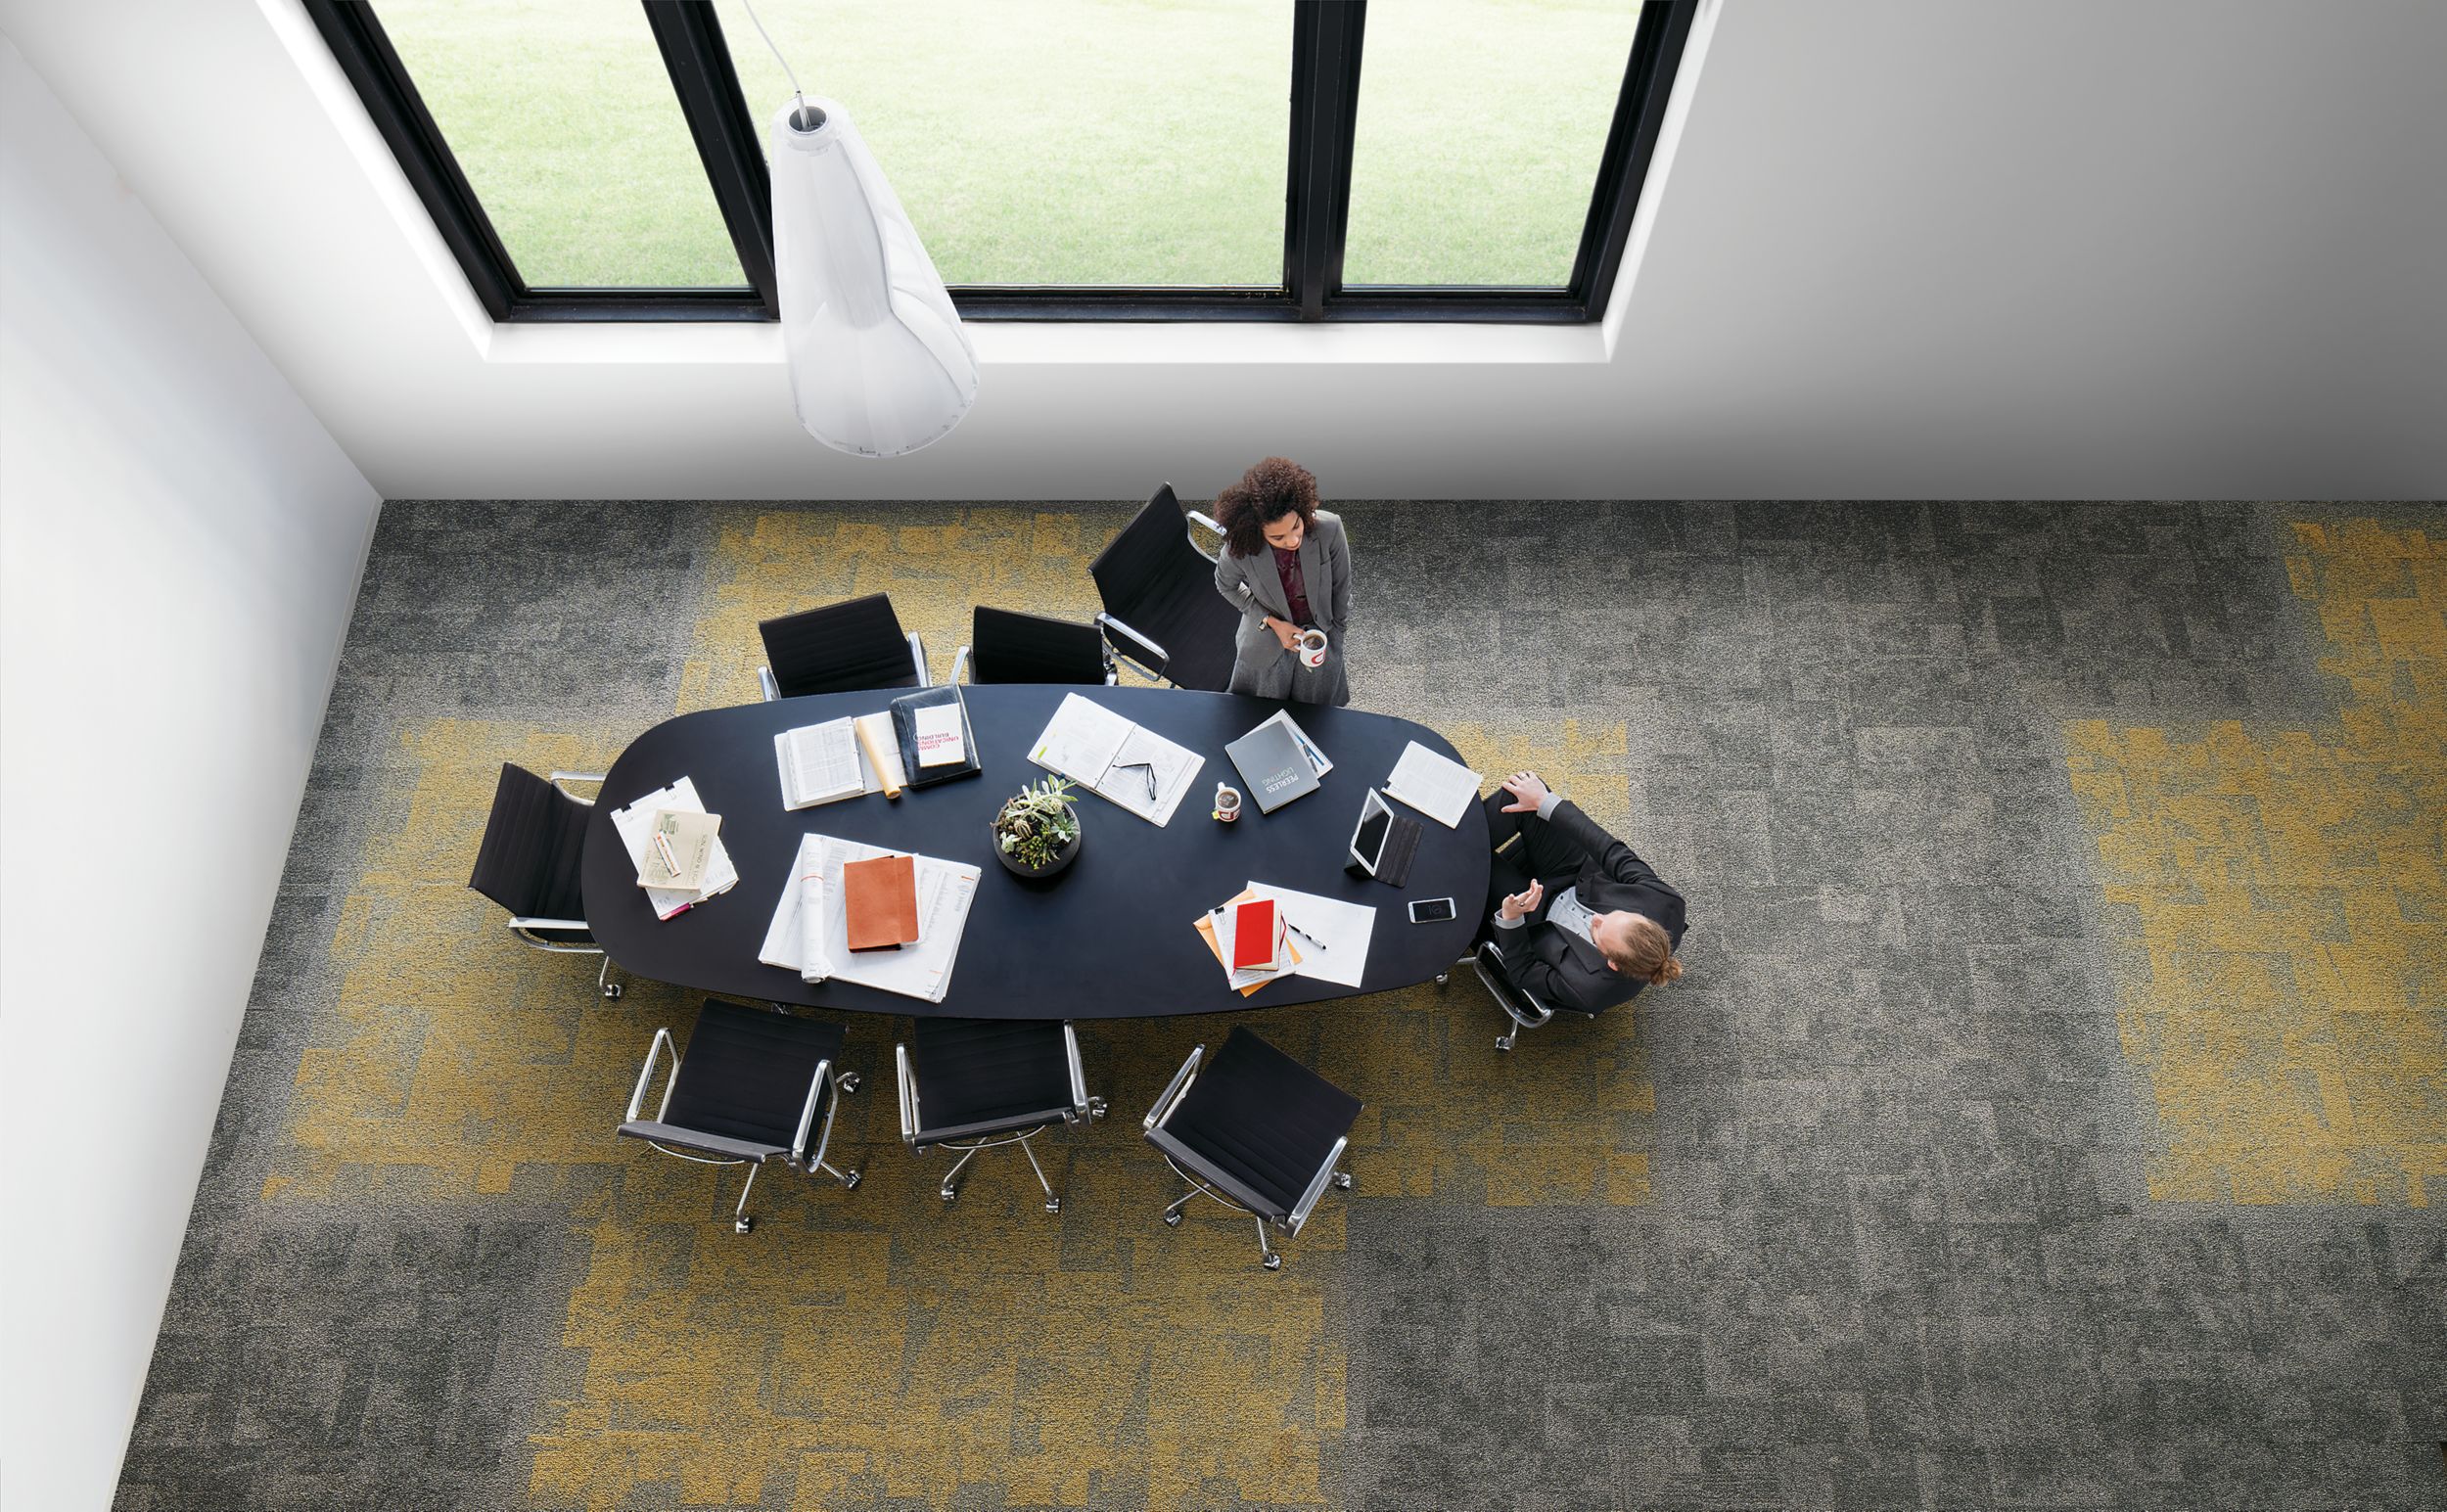 Interface Open Air 404 carpet tile in overhead view of meeting table with man and woman talking and drinking coffee Bildnummer 1